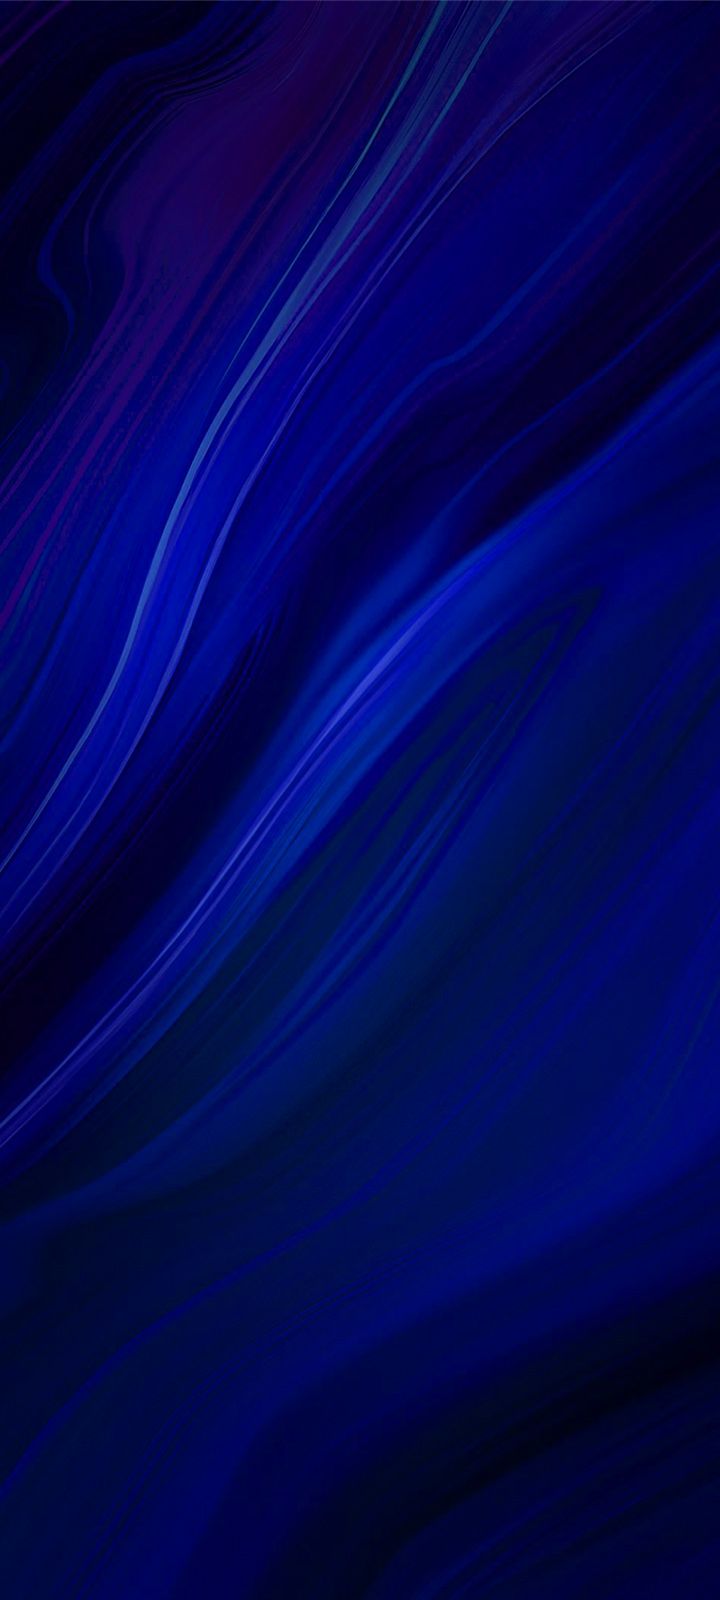 Free Wallpaper for Samsung Galaxy A12 with Abstract Dark Blue Background HD Wallpaper for Laptops and Smartphones